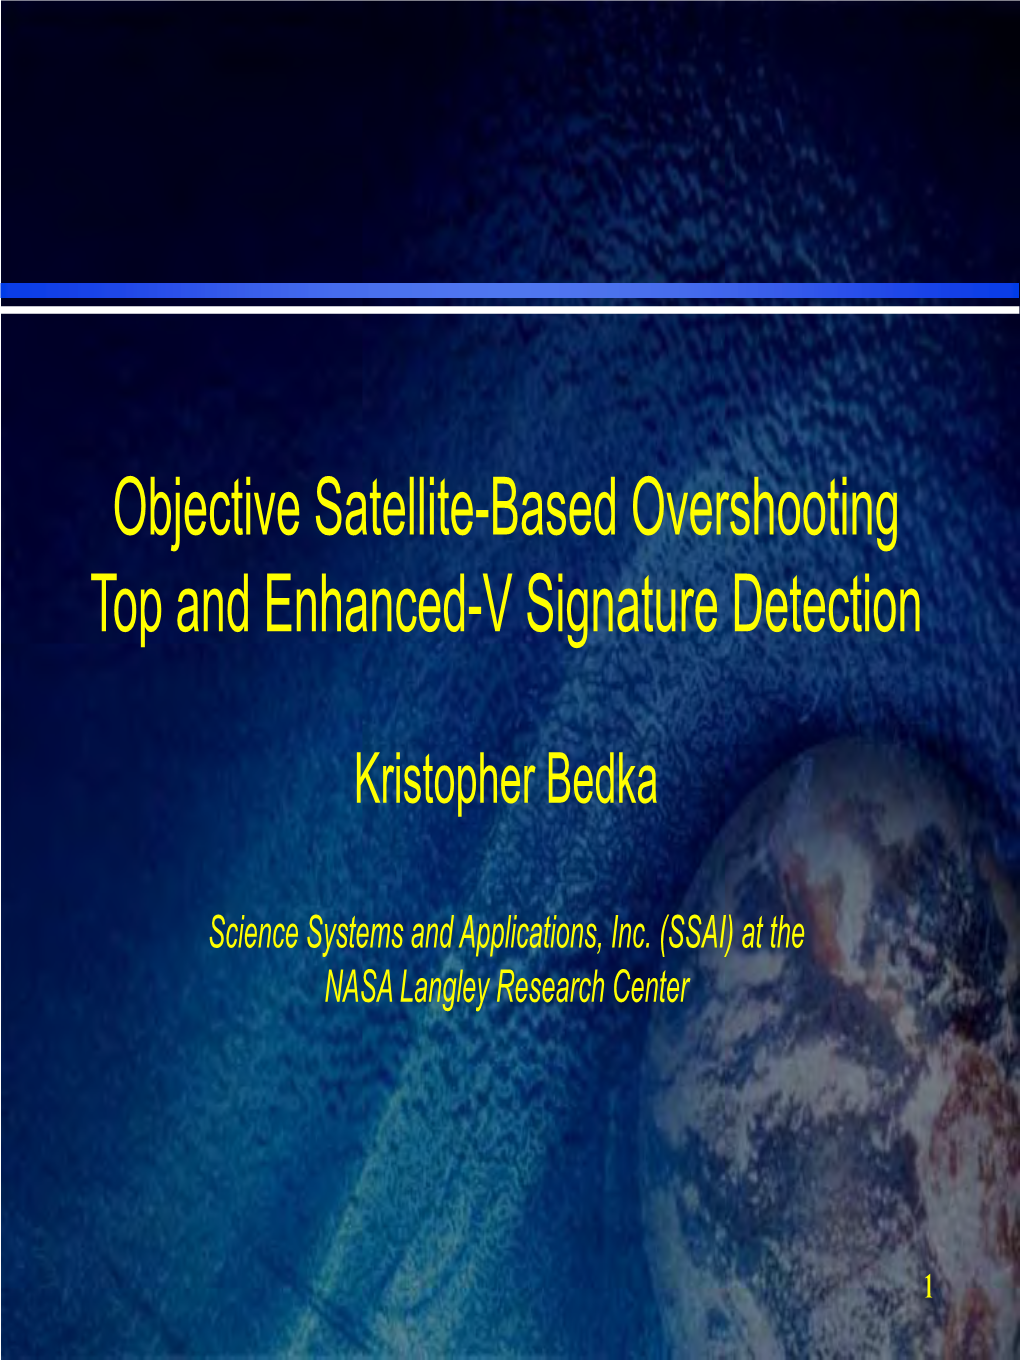 Objective Satellite-Based Overshooting Top and Enhanced-V Signature Detection